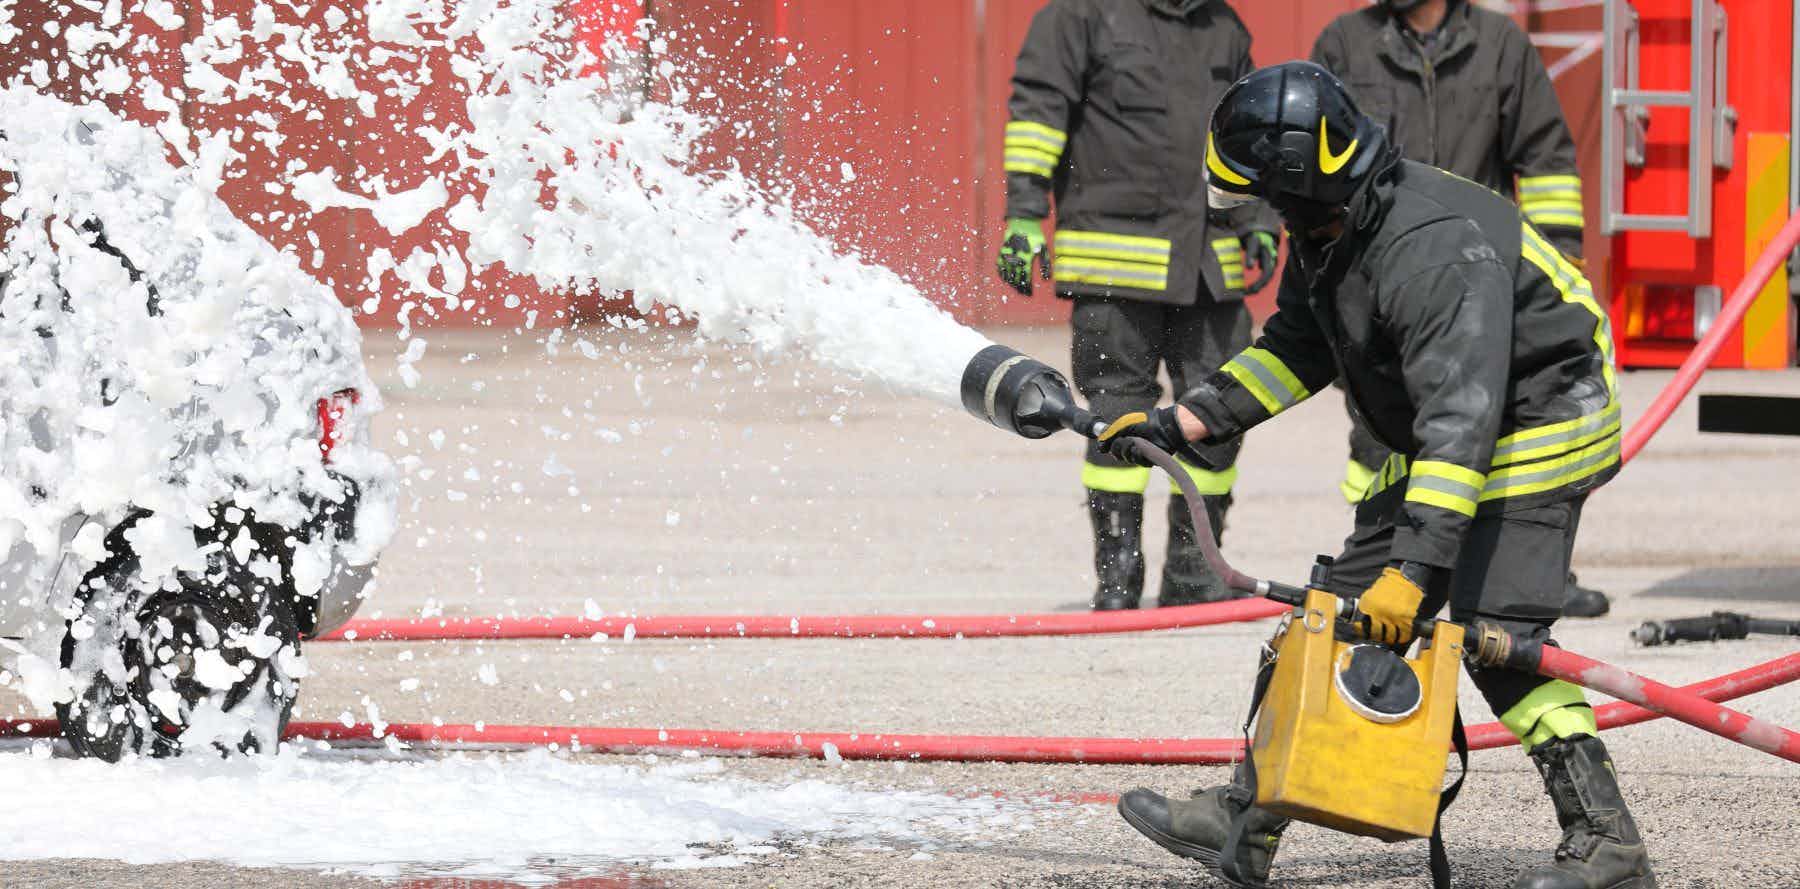 Firefighter using foam to extinguish fire